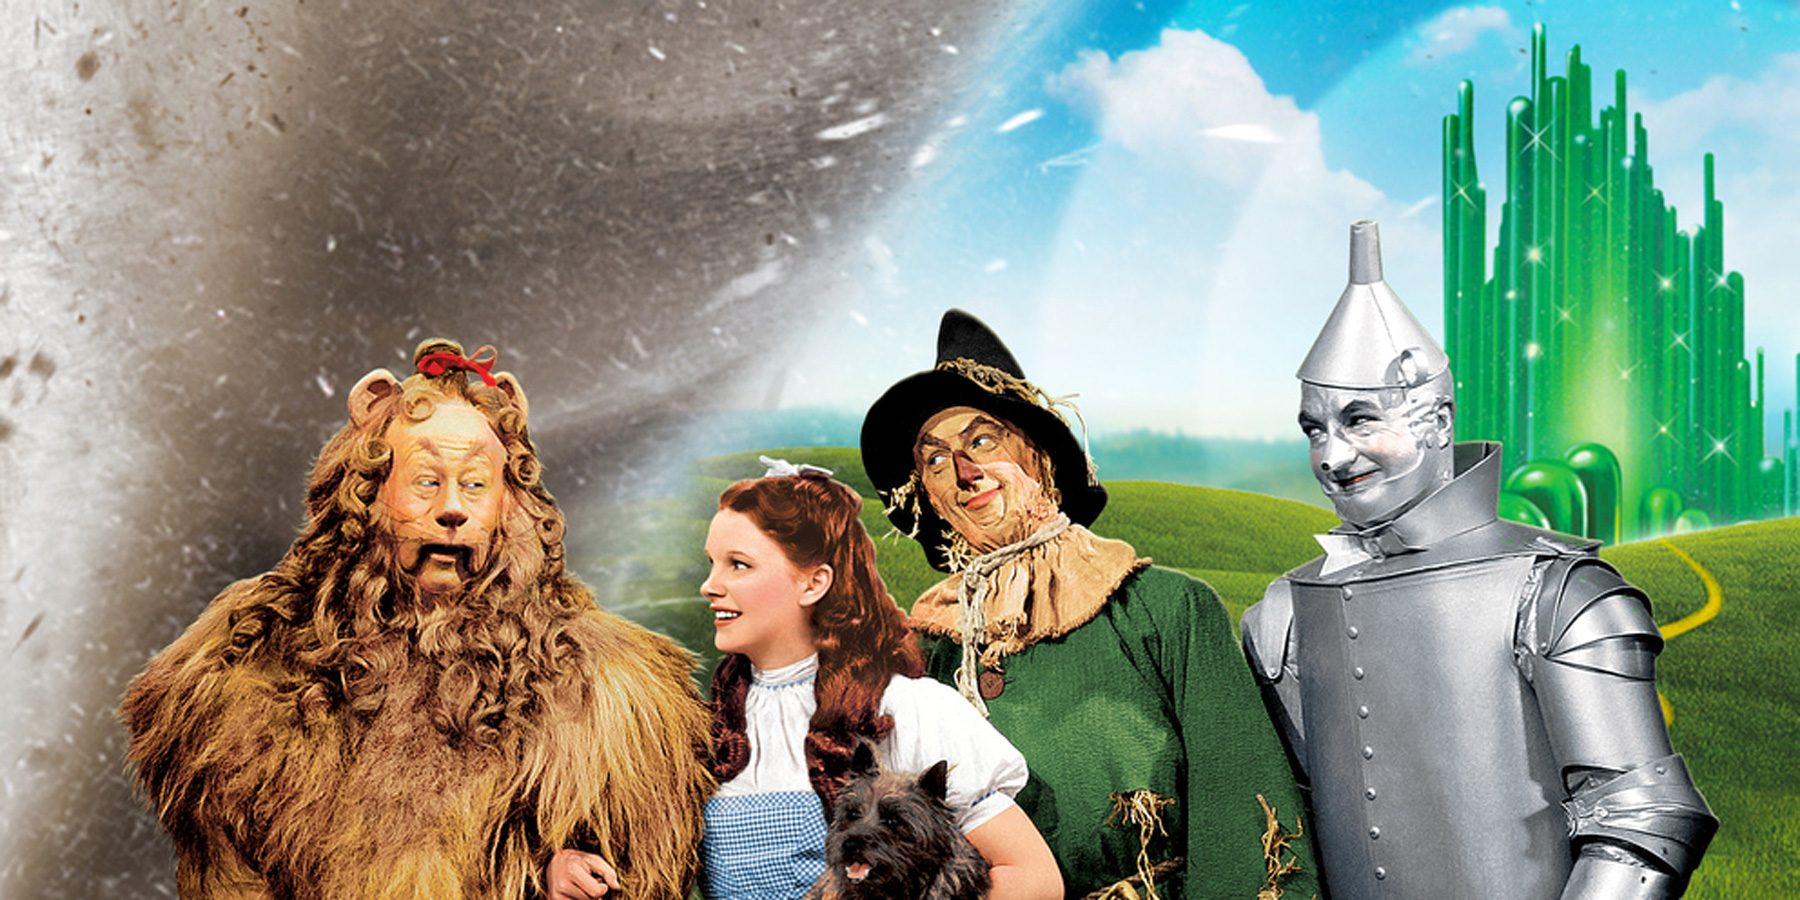 The True Meaning Of the Song, “Somewhere Over The Rainbow” From the Wizard Of Oz